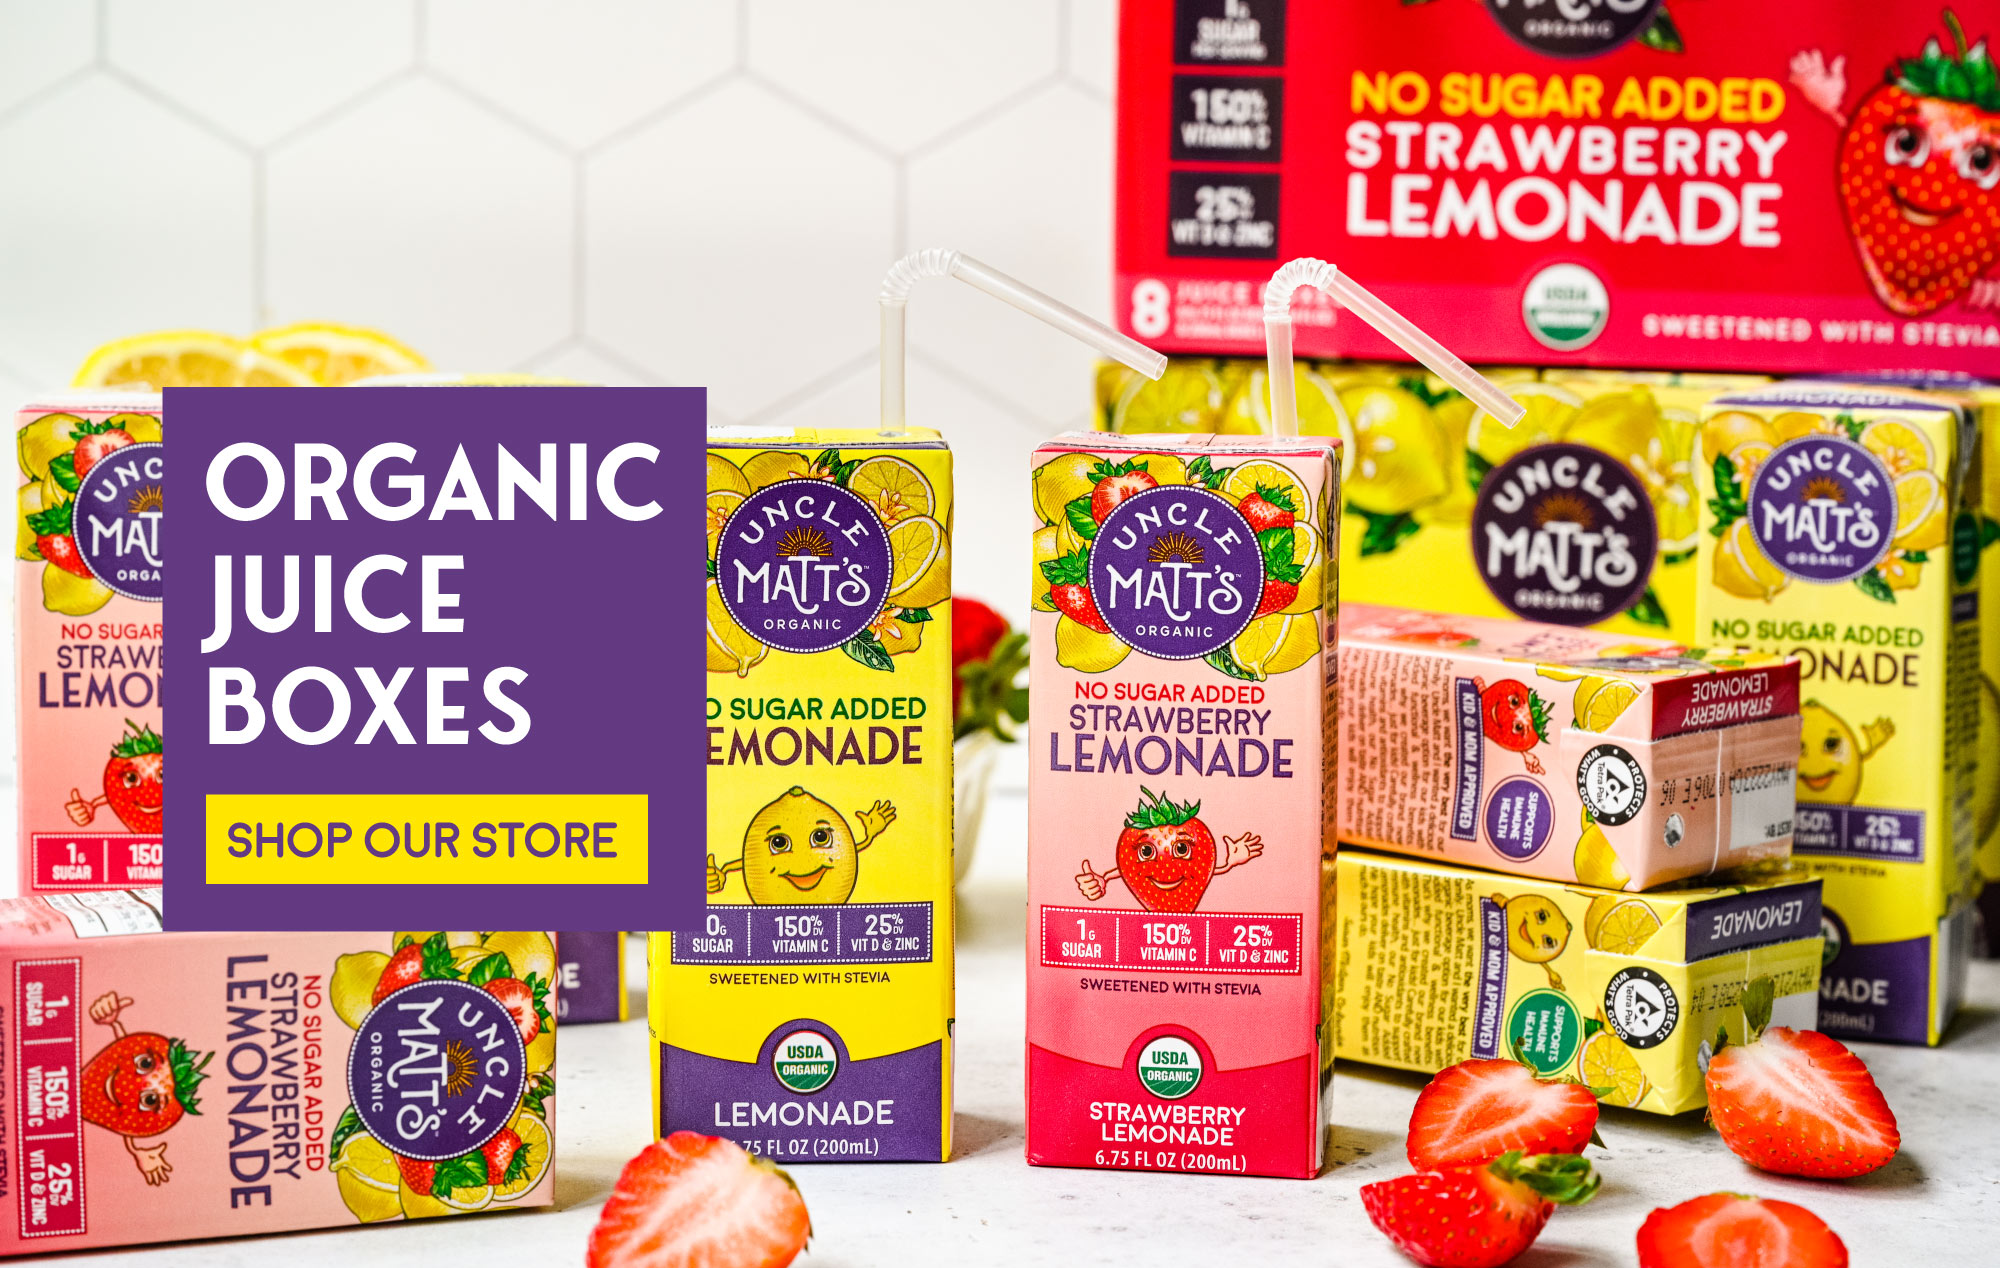 Shop Uncle Matt's Organic Juice Boxes, available in two flavors. Click to shop our store.